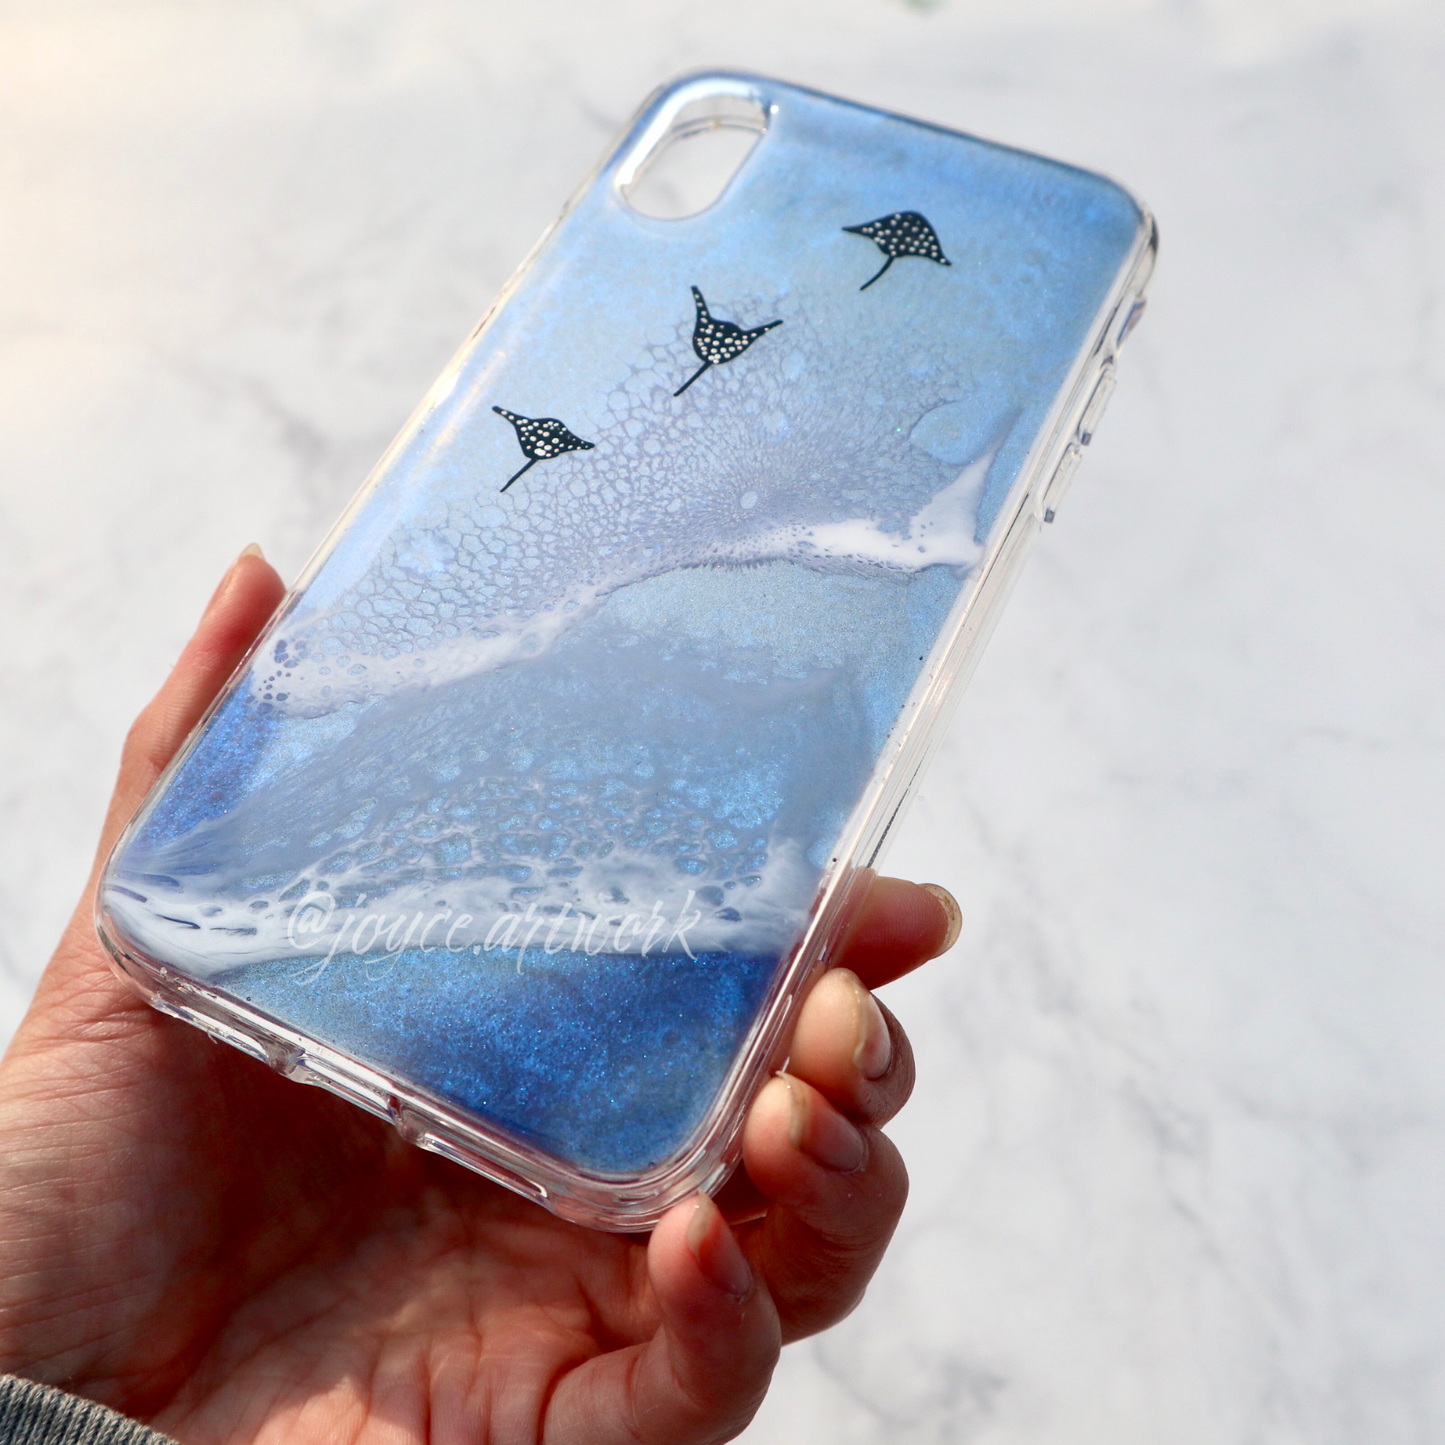 iPhone XR phone case with spotted rays